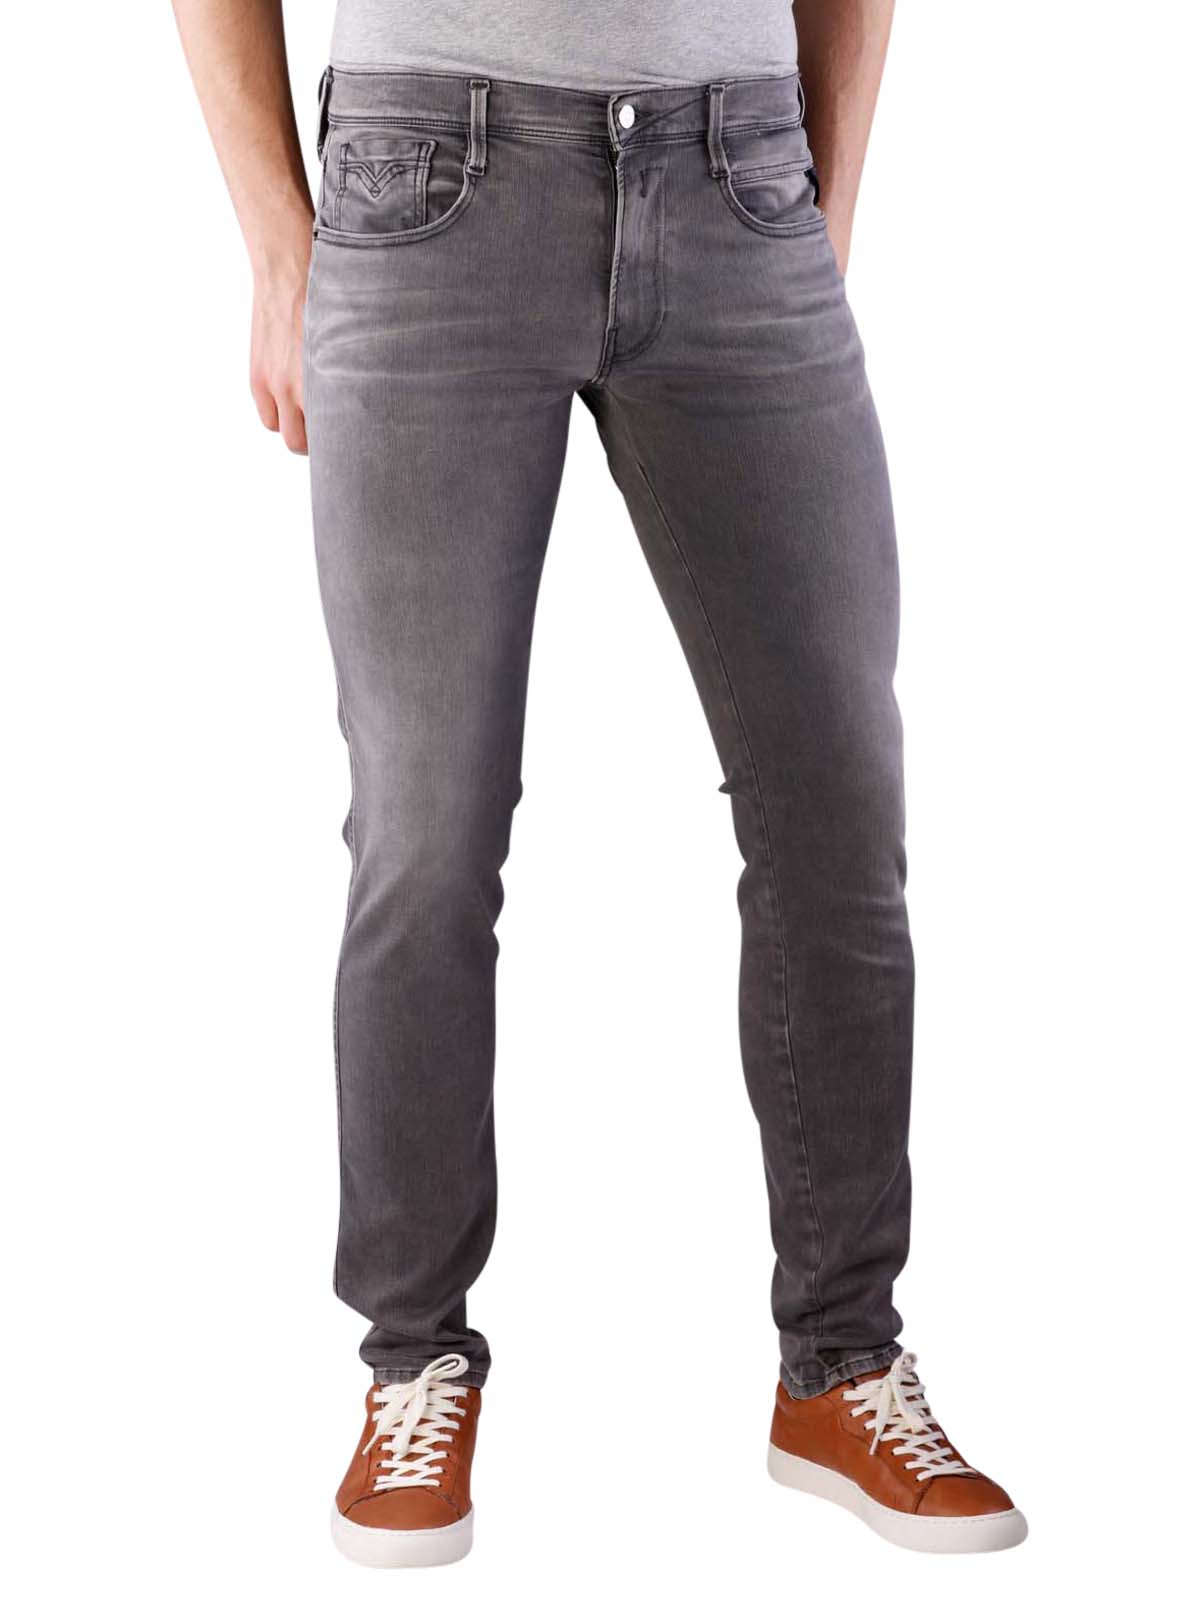 replay anbass jeans slim fit